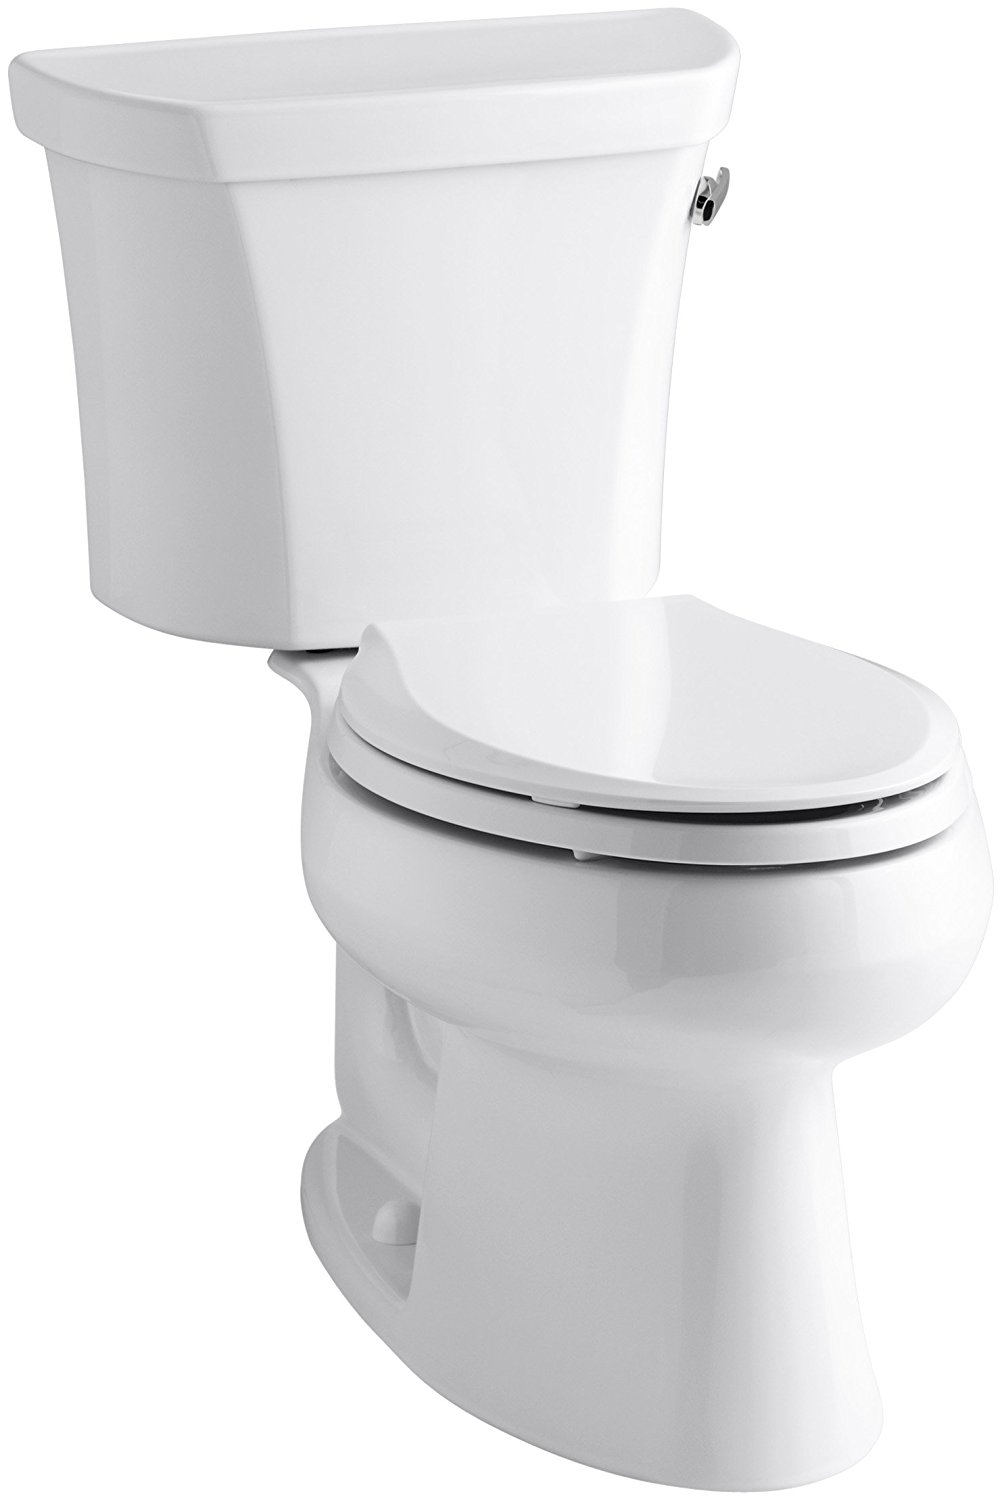 Best Kohler Toilet with Excellent Sanitary and Cleanliness